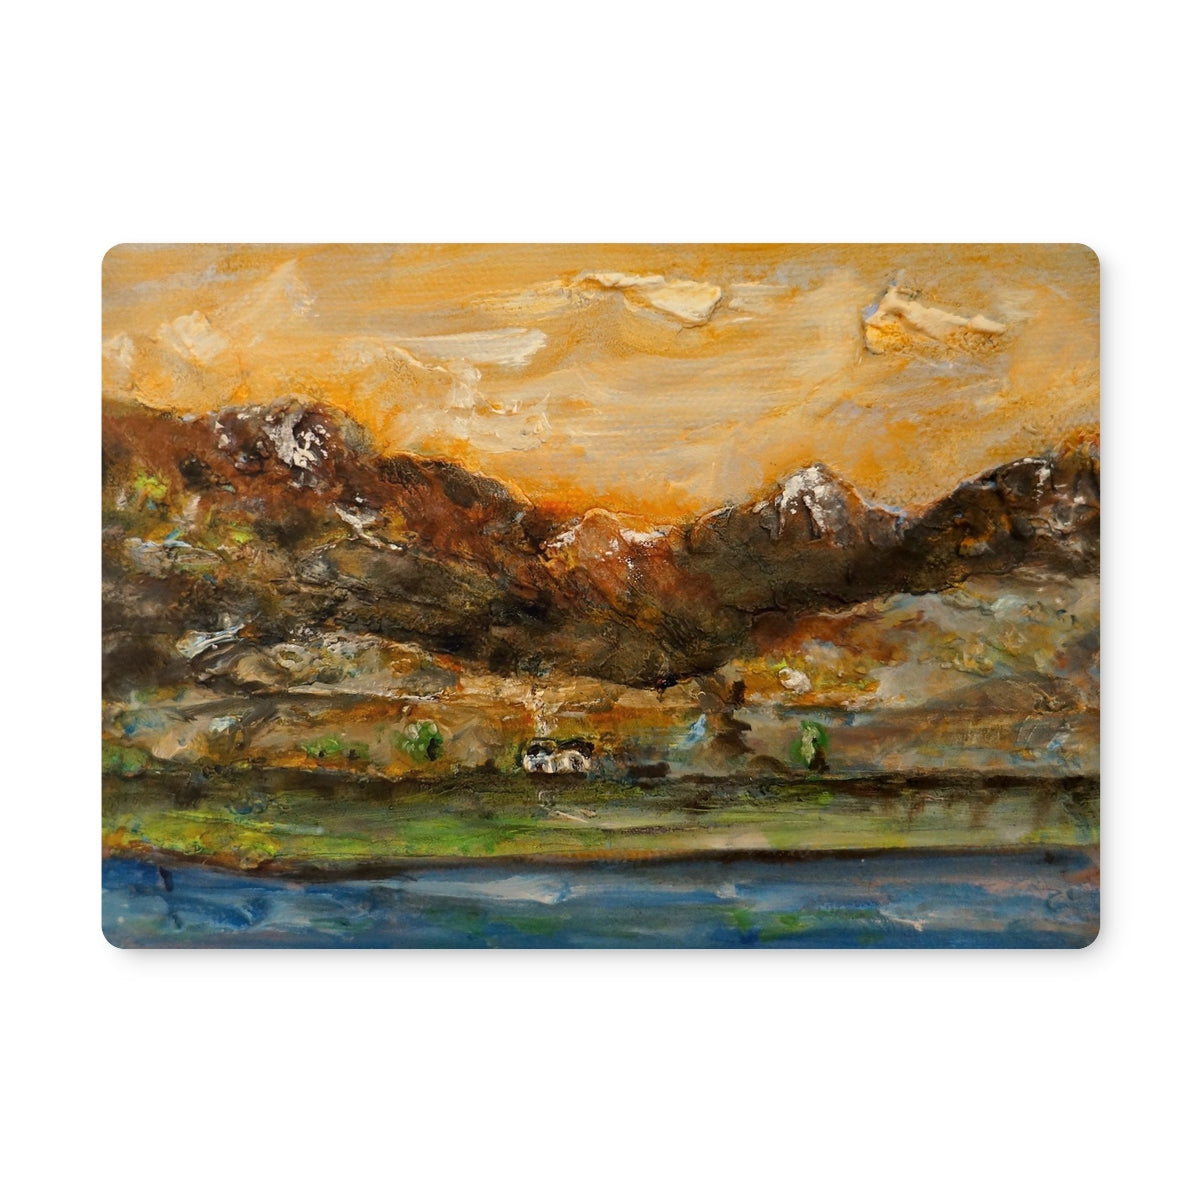 A Glencoe Cottage Art Gifts Placemat-Placemats-Glencoe Art Gallery-Single Placemat-Paintings, Prints, Homeware, Art Gifts From Scotland By Scottish Artist Kevin Hunter